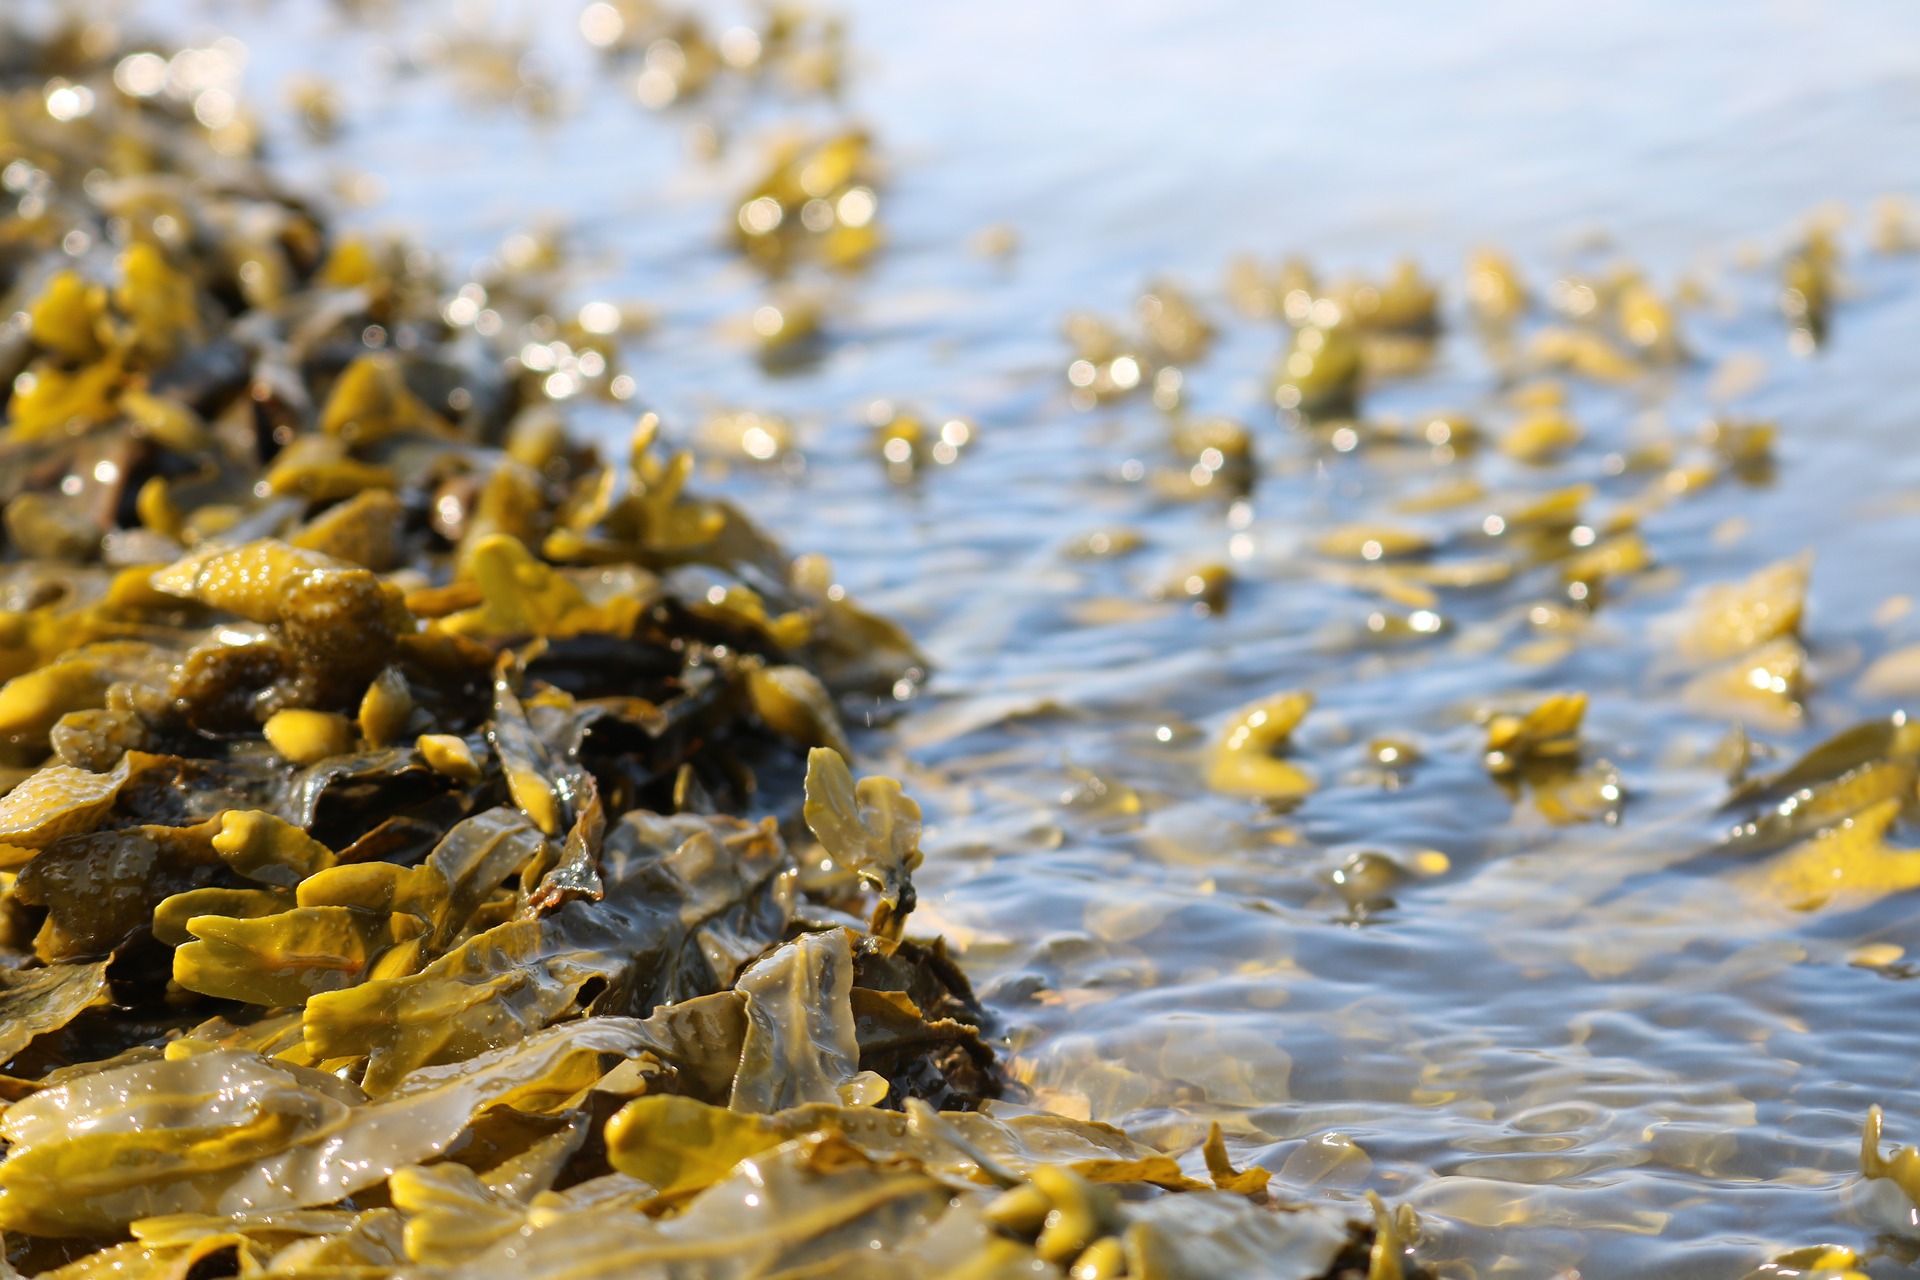 Reuters Invents Fake Seaweed Crisis as Harvests More than Double -  ClimateRealism